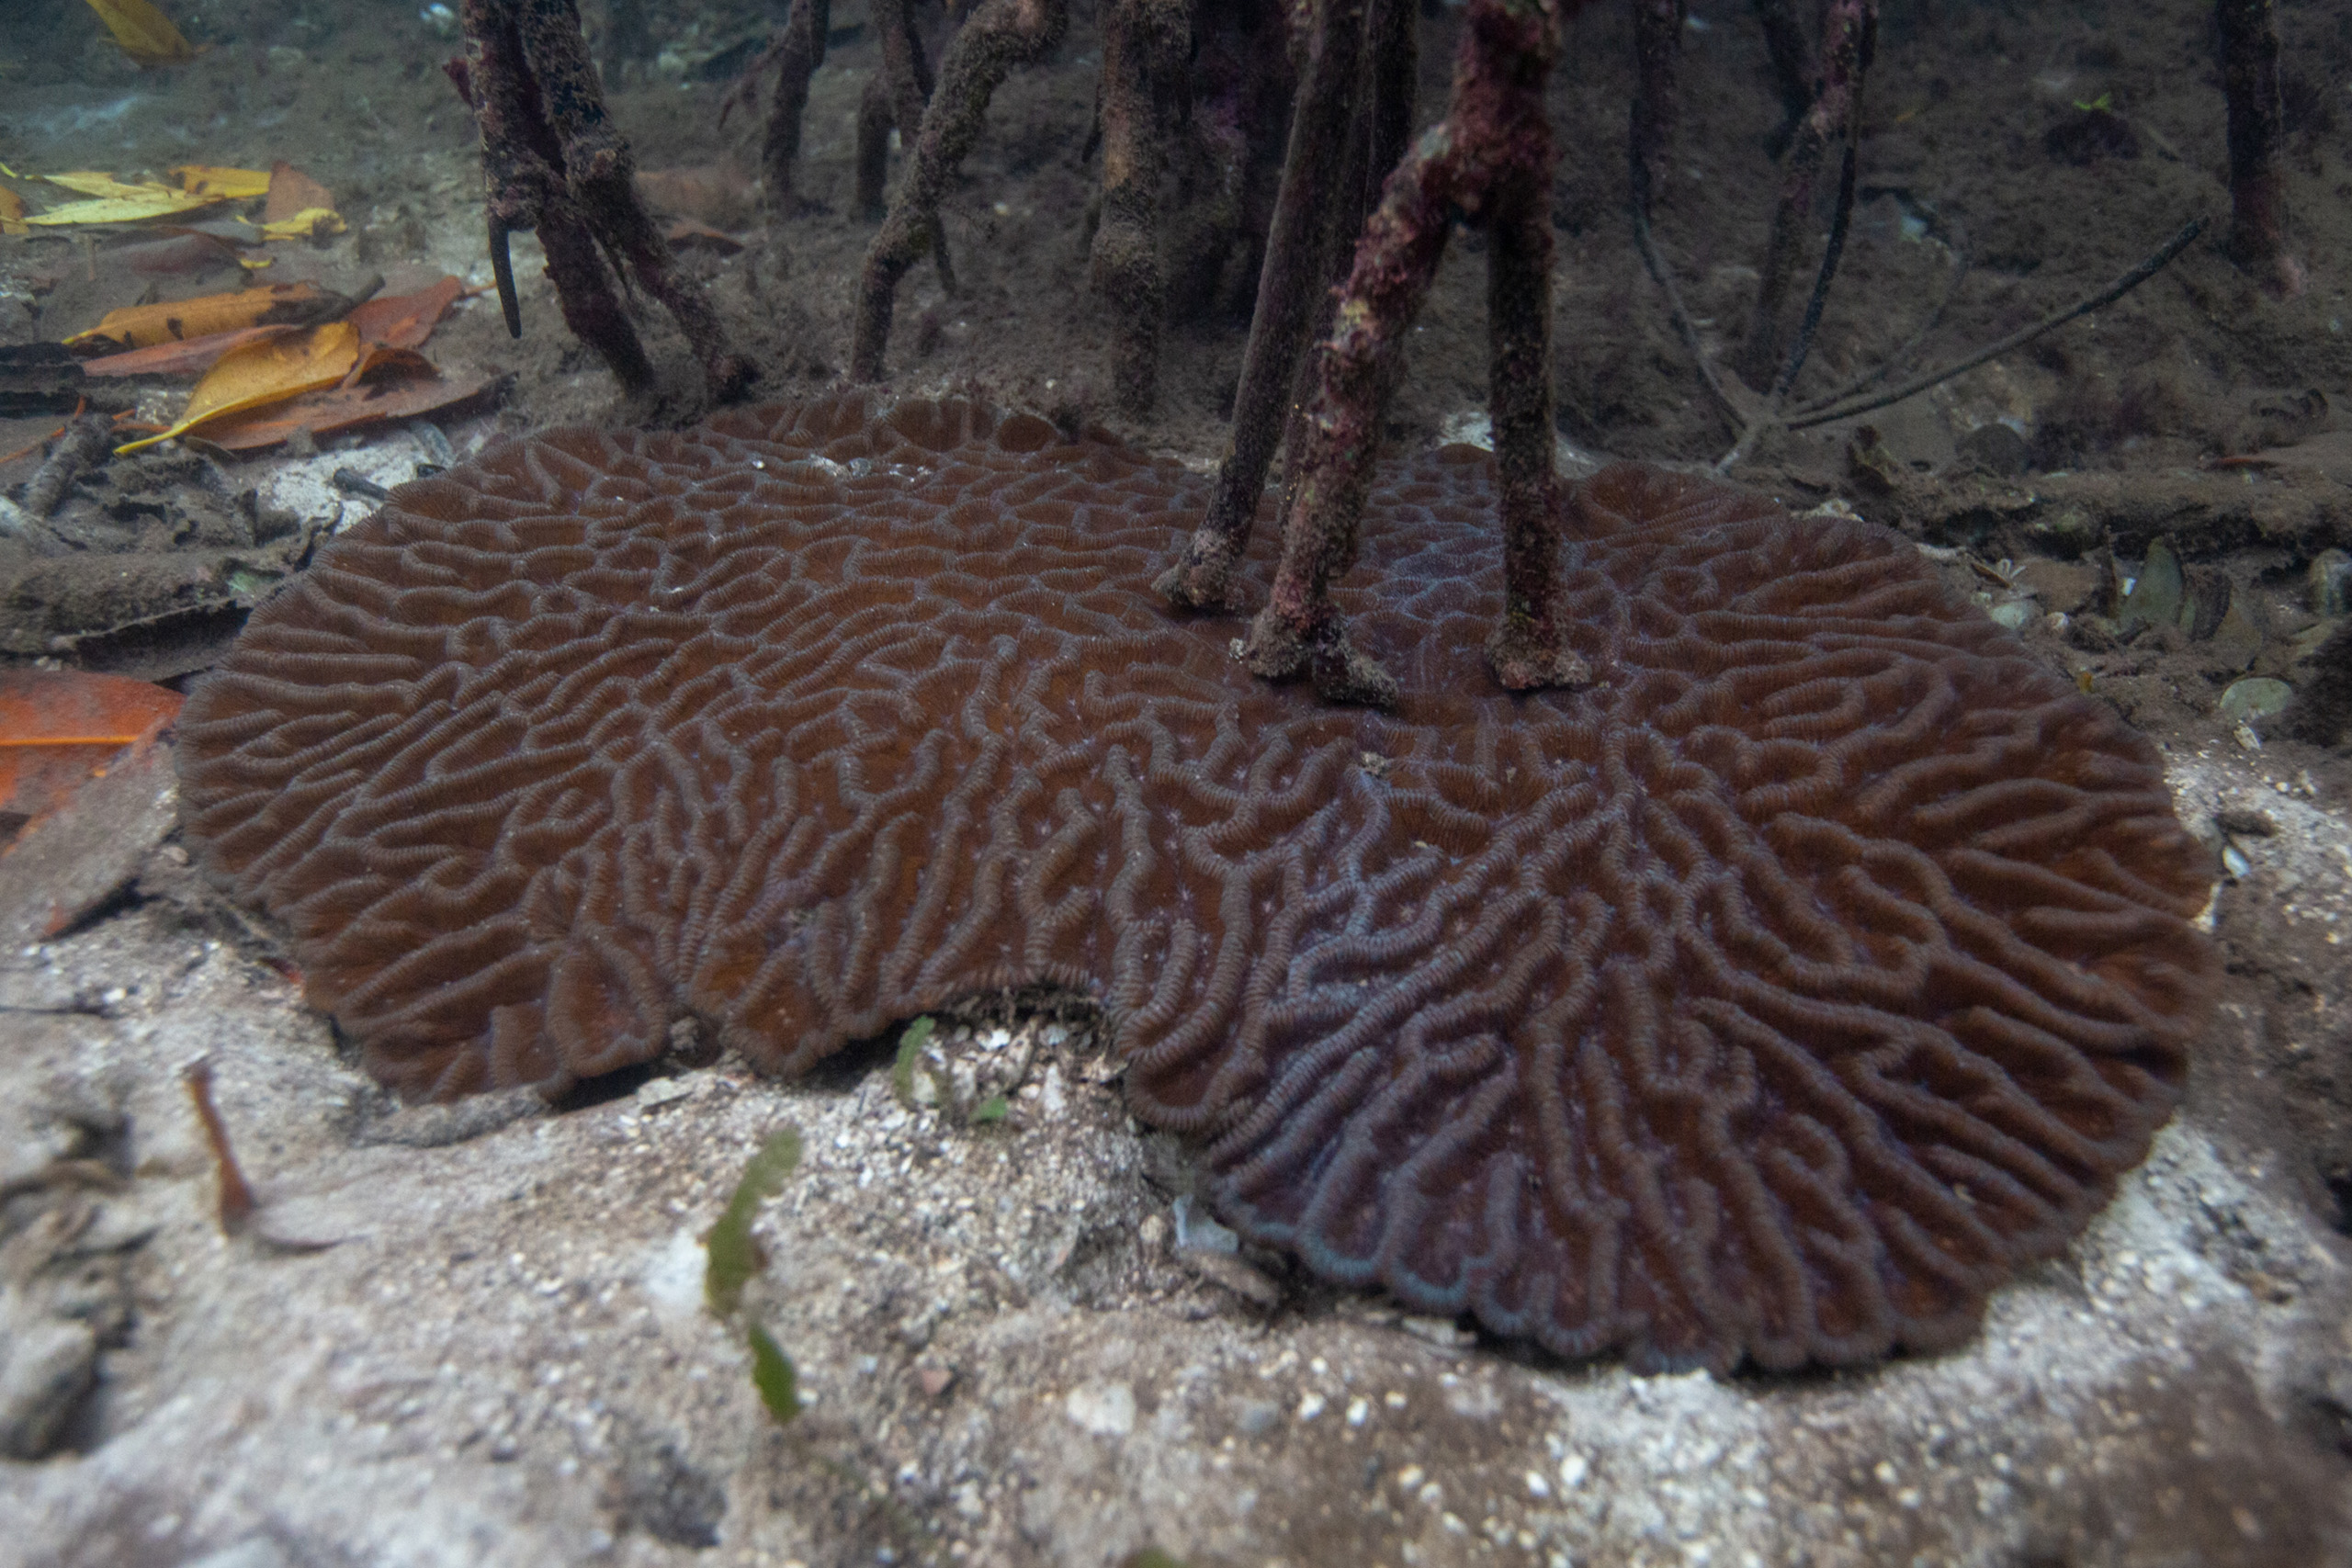 In an unlikely phenomenon, large corals are growing several meters into the mangrove forests in Bocas del Toro, even changing their shape and color as they do, such as this brain coral.